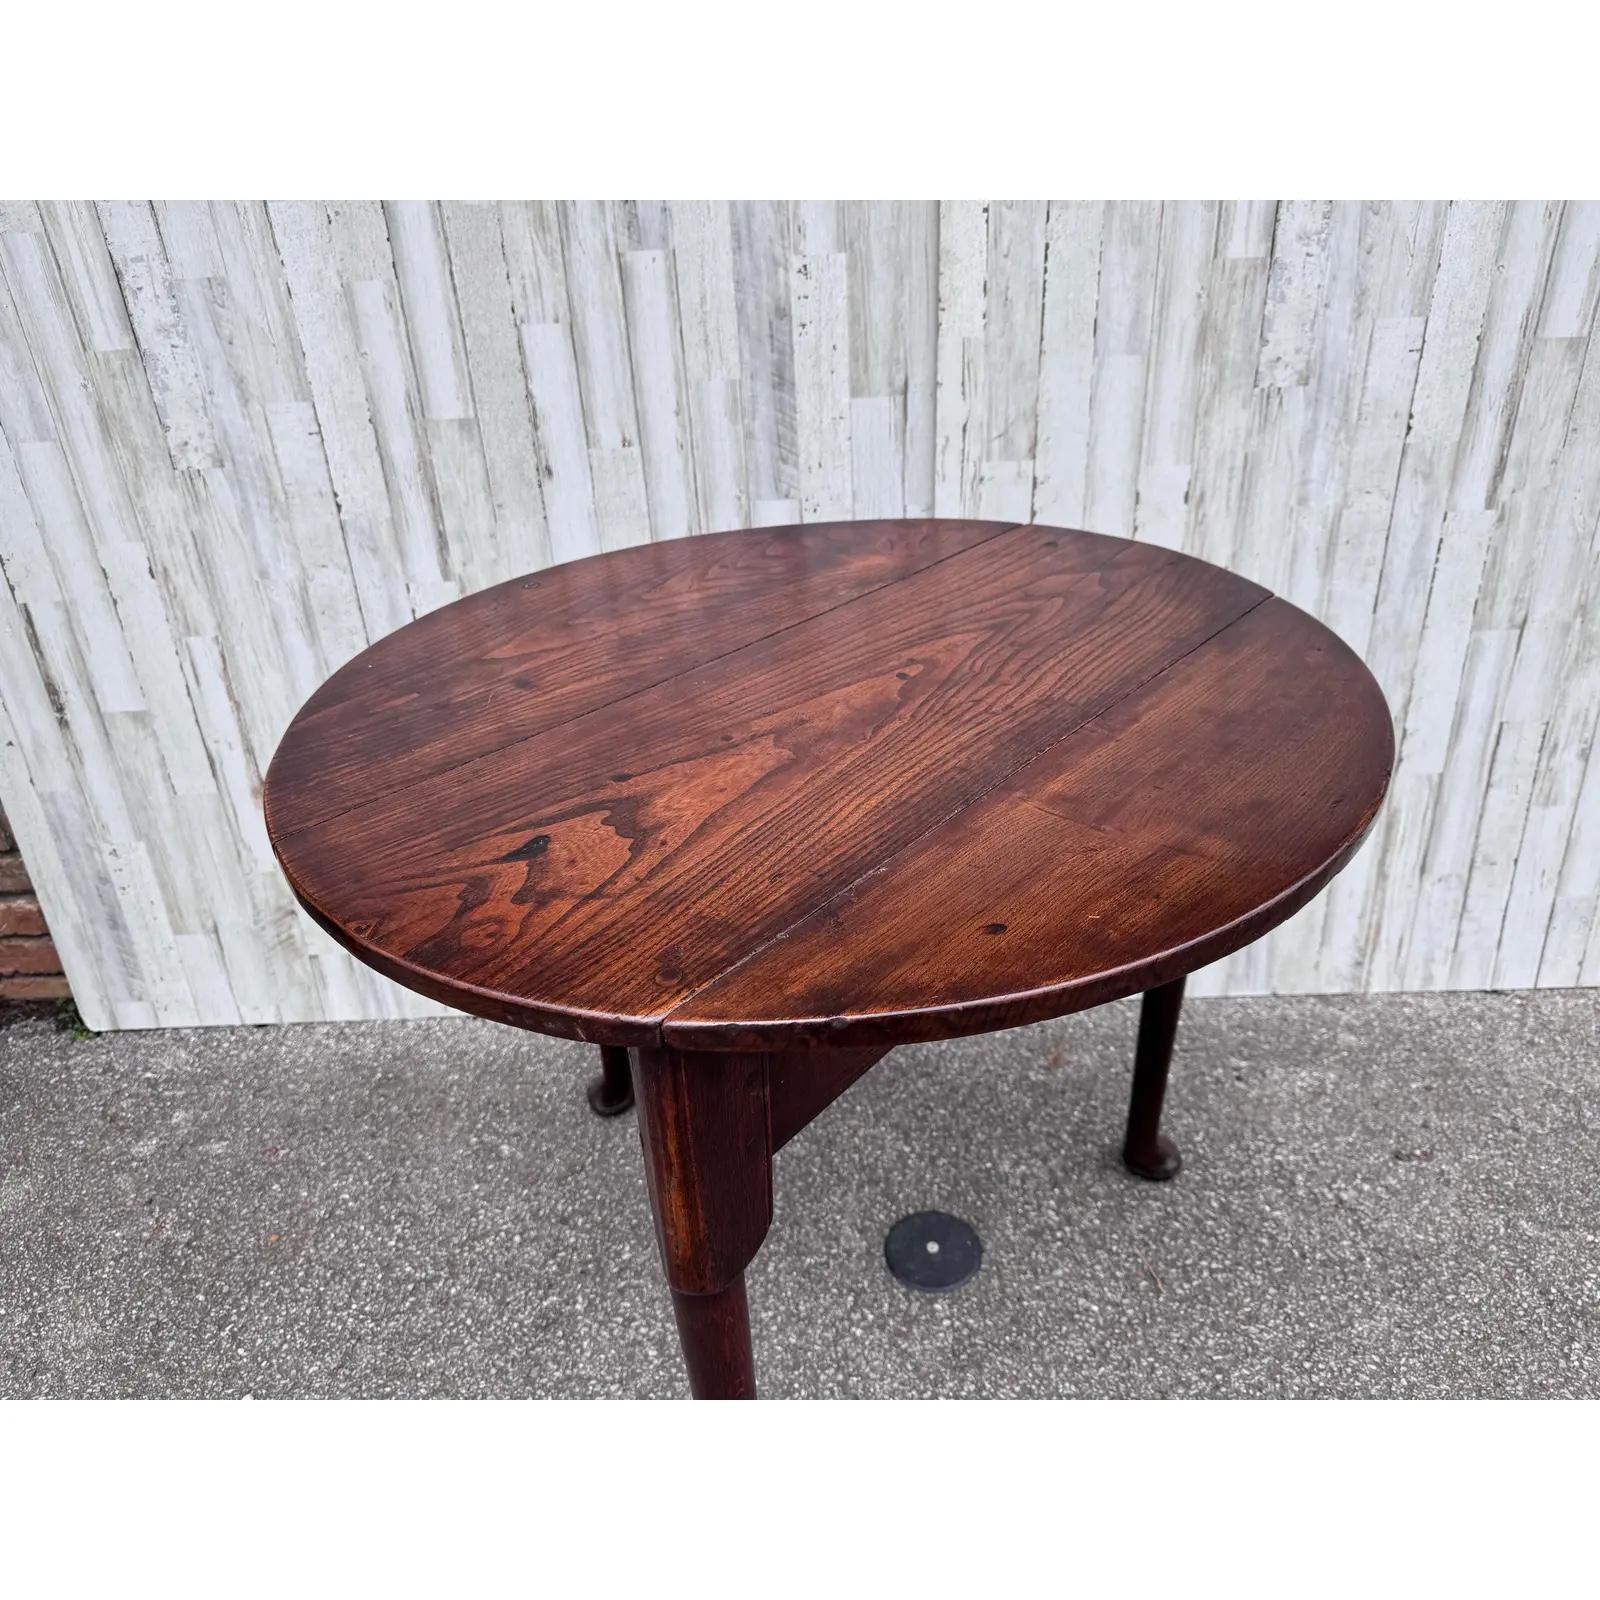 This is a most unique early 19th century English cricket table. All original with such amazing patina and color, and how unique is the dropleaf that makes it perfect to push up against the wall. Very unique and very unusual. #868
